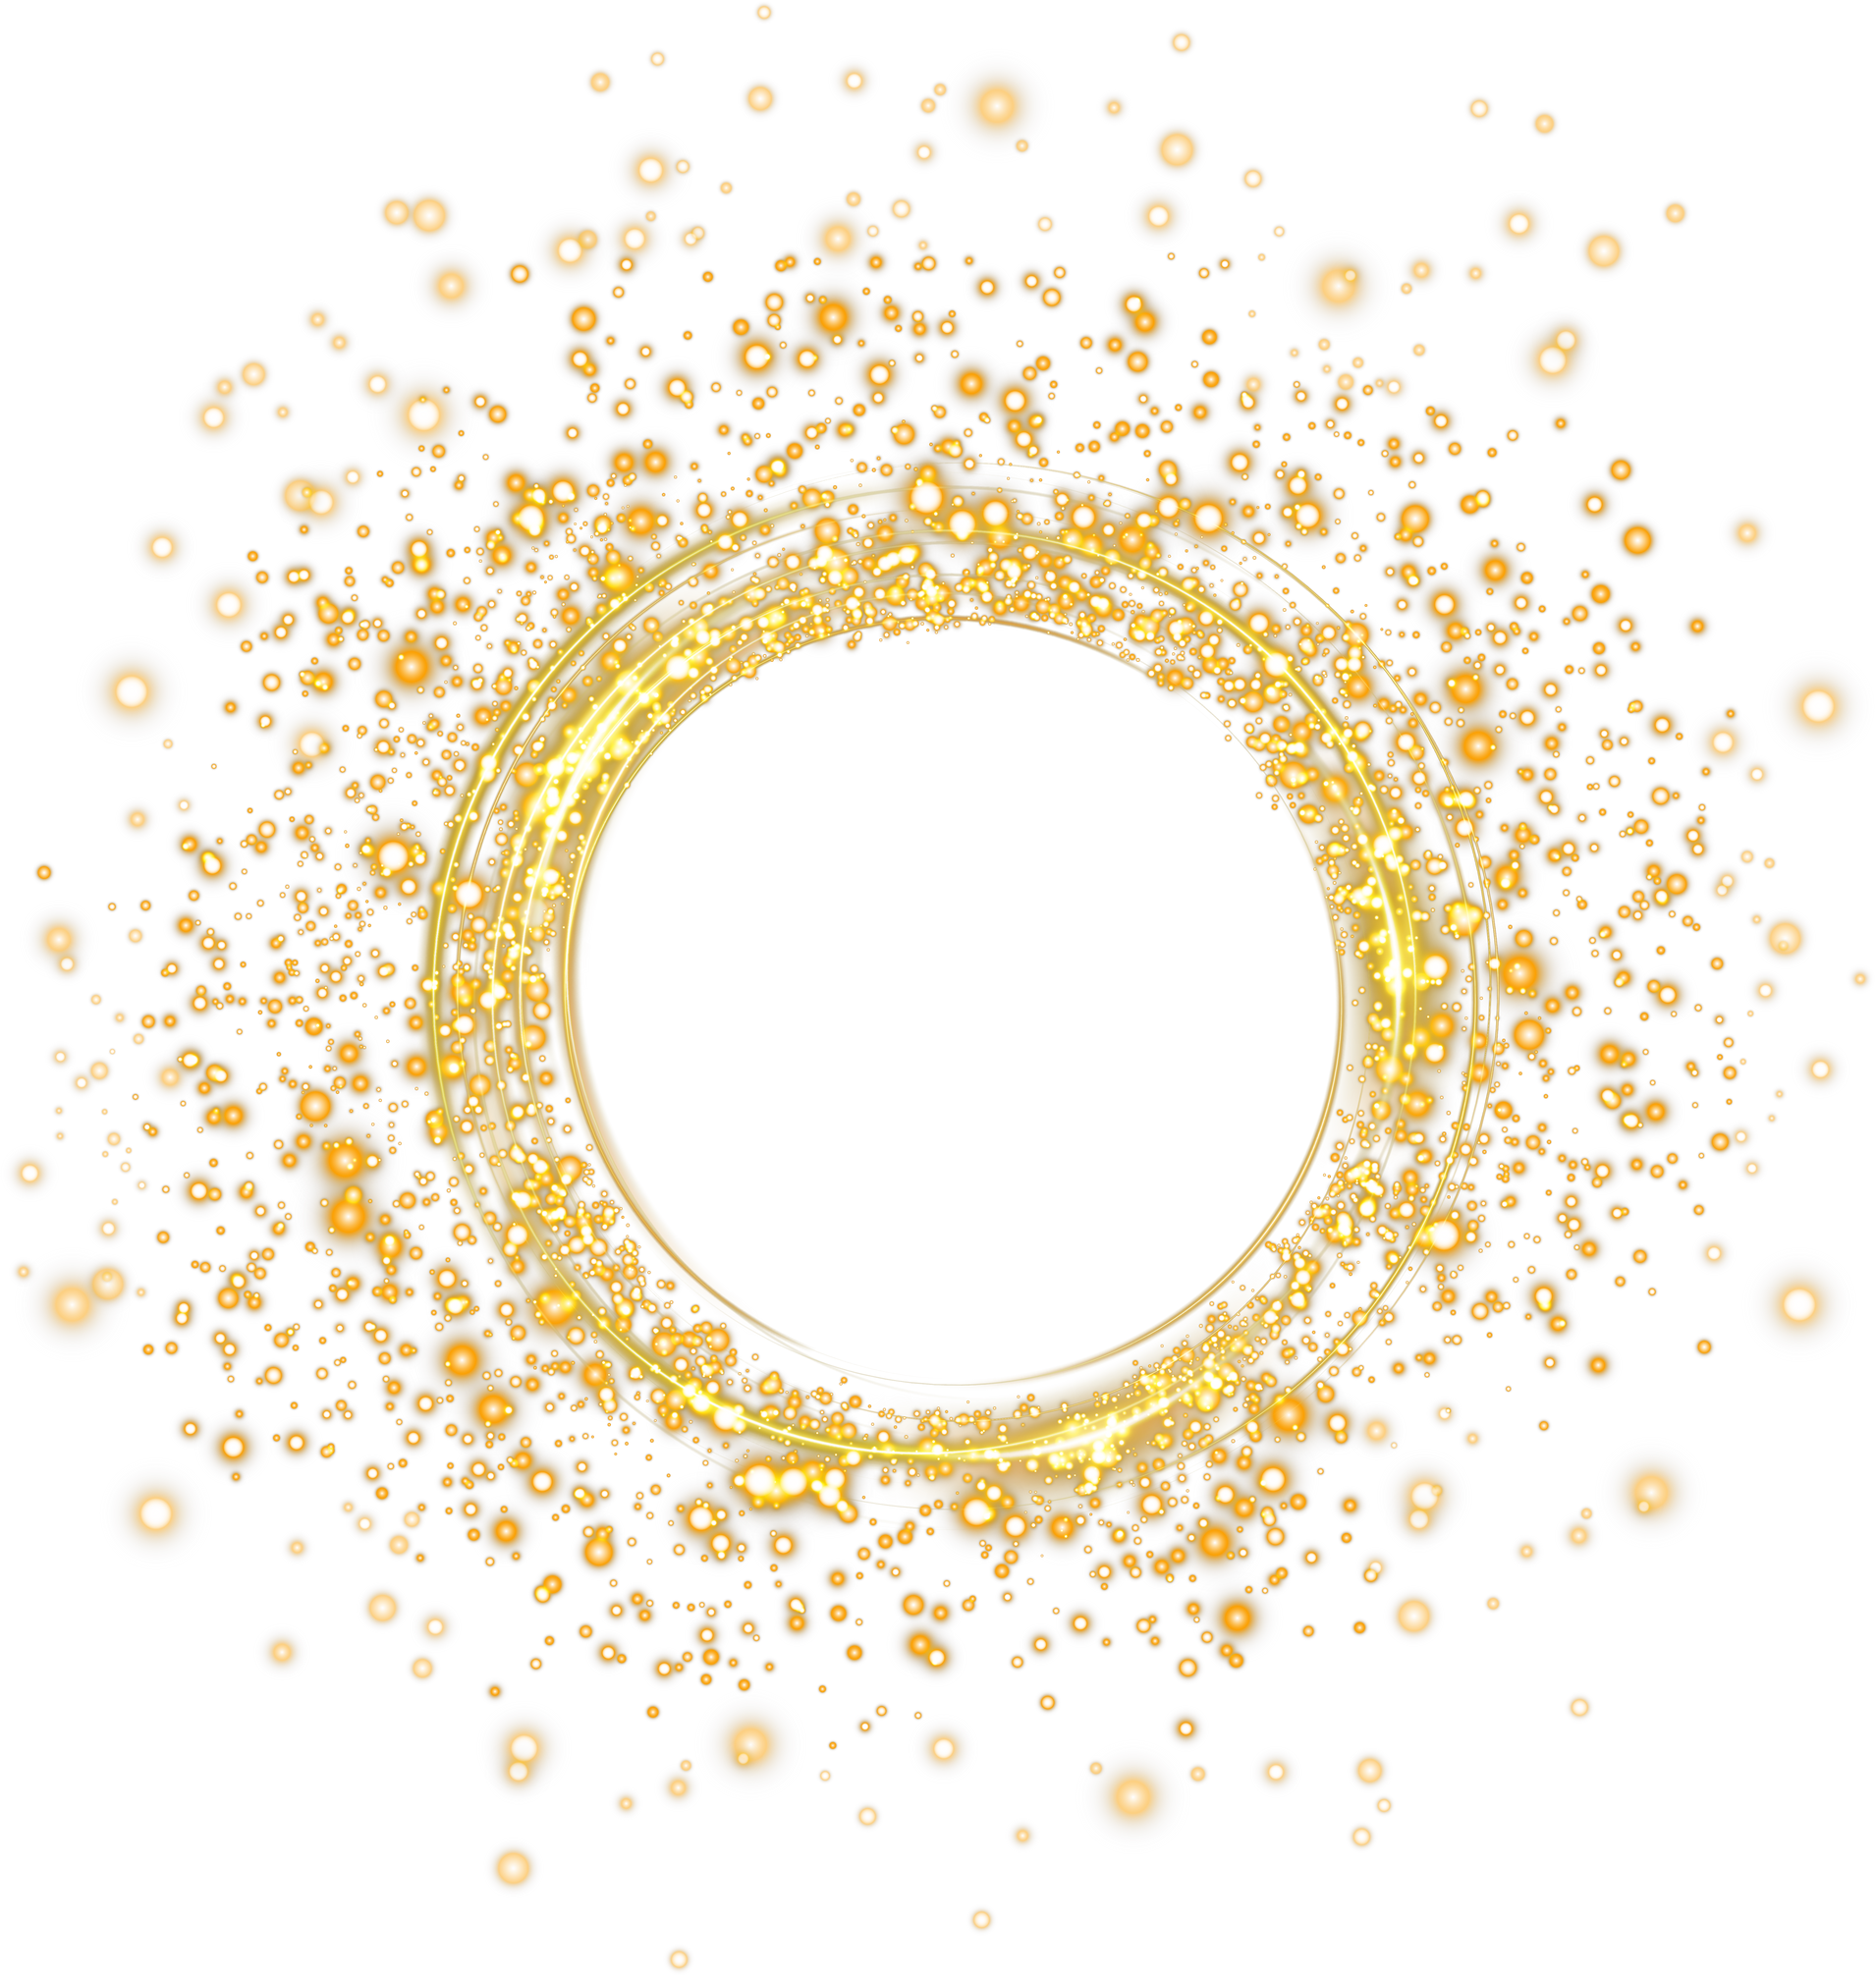 Yellow magical fantasy portal. Round light frame, futuristic teleporter. Lighting effect. Golden neon lights illuminate night scene with sequins. Golden neon ring. Round shape with small particles of golden dust and lights, shiny frame.